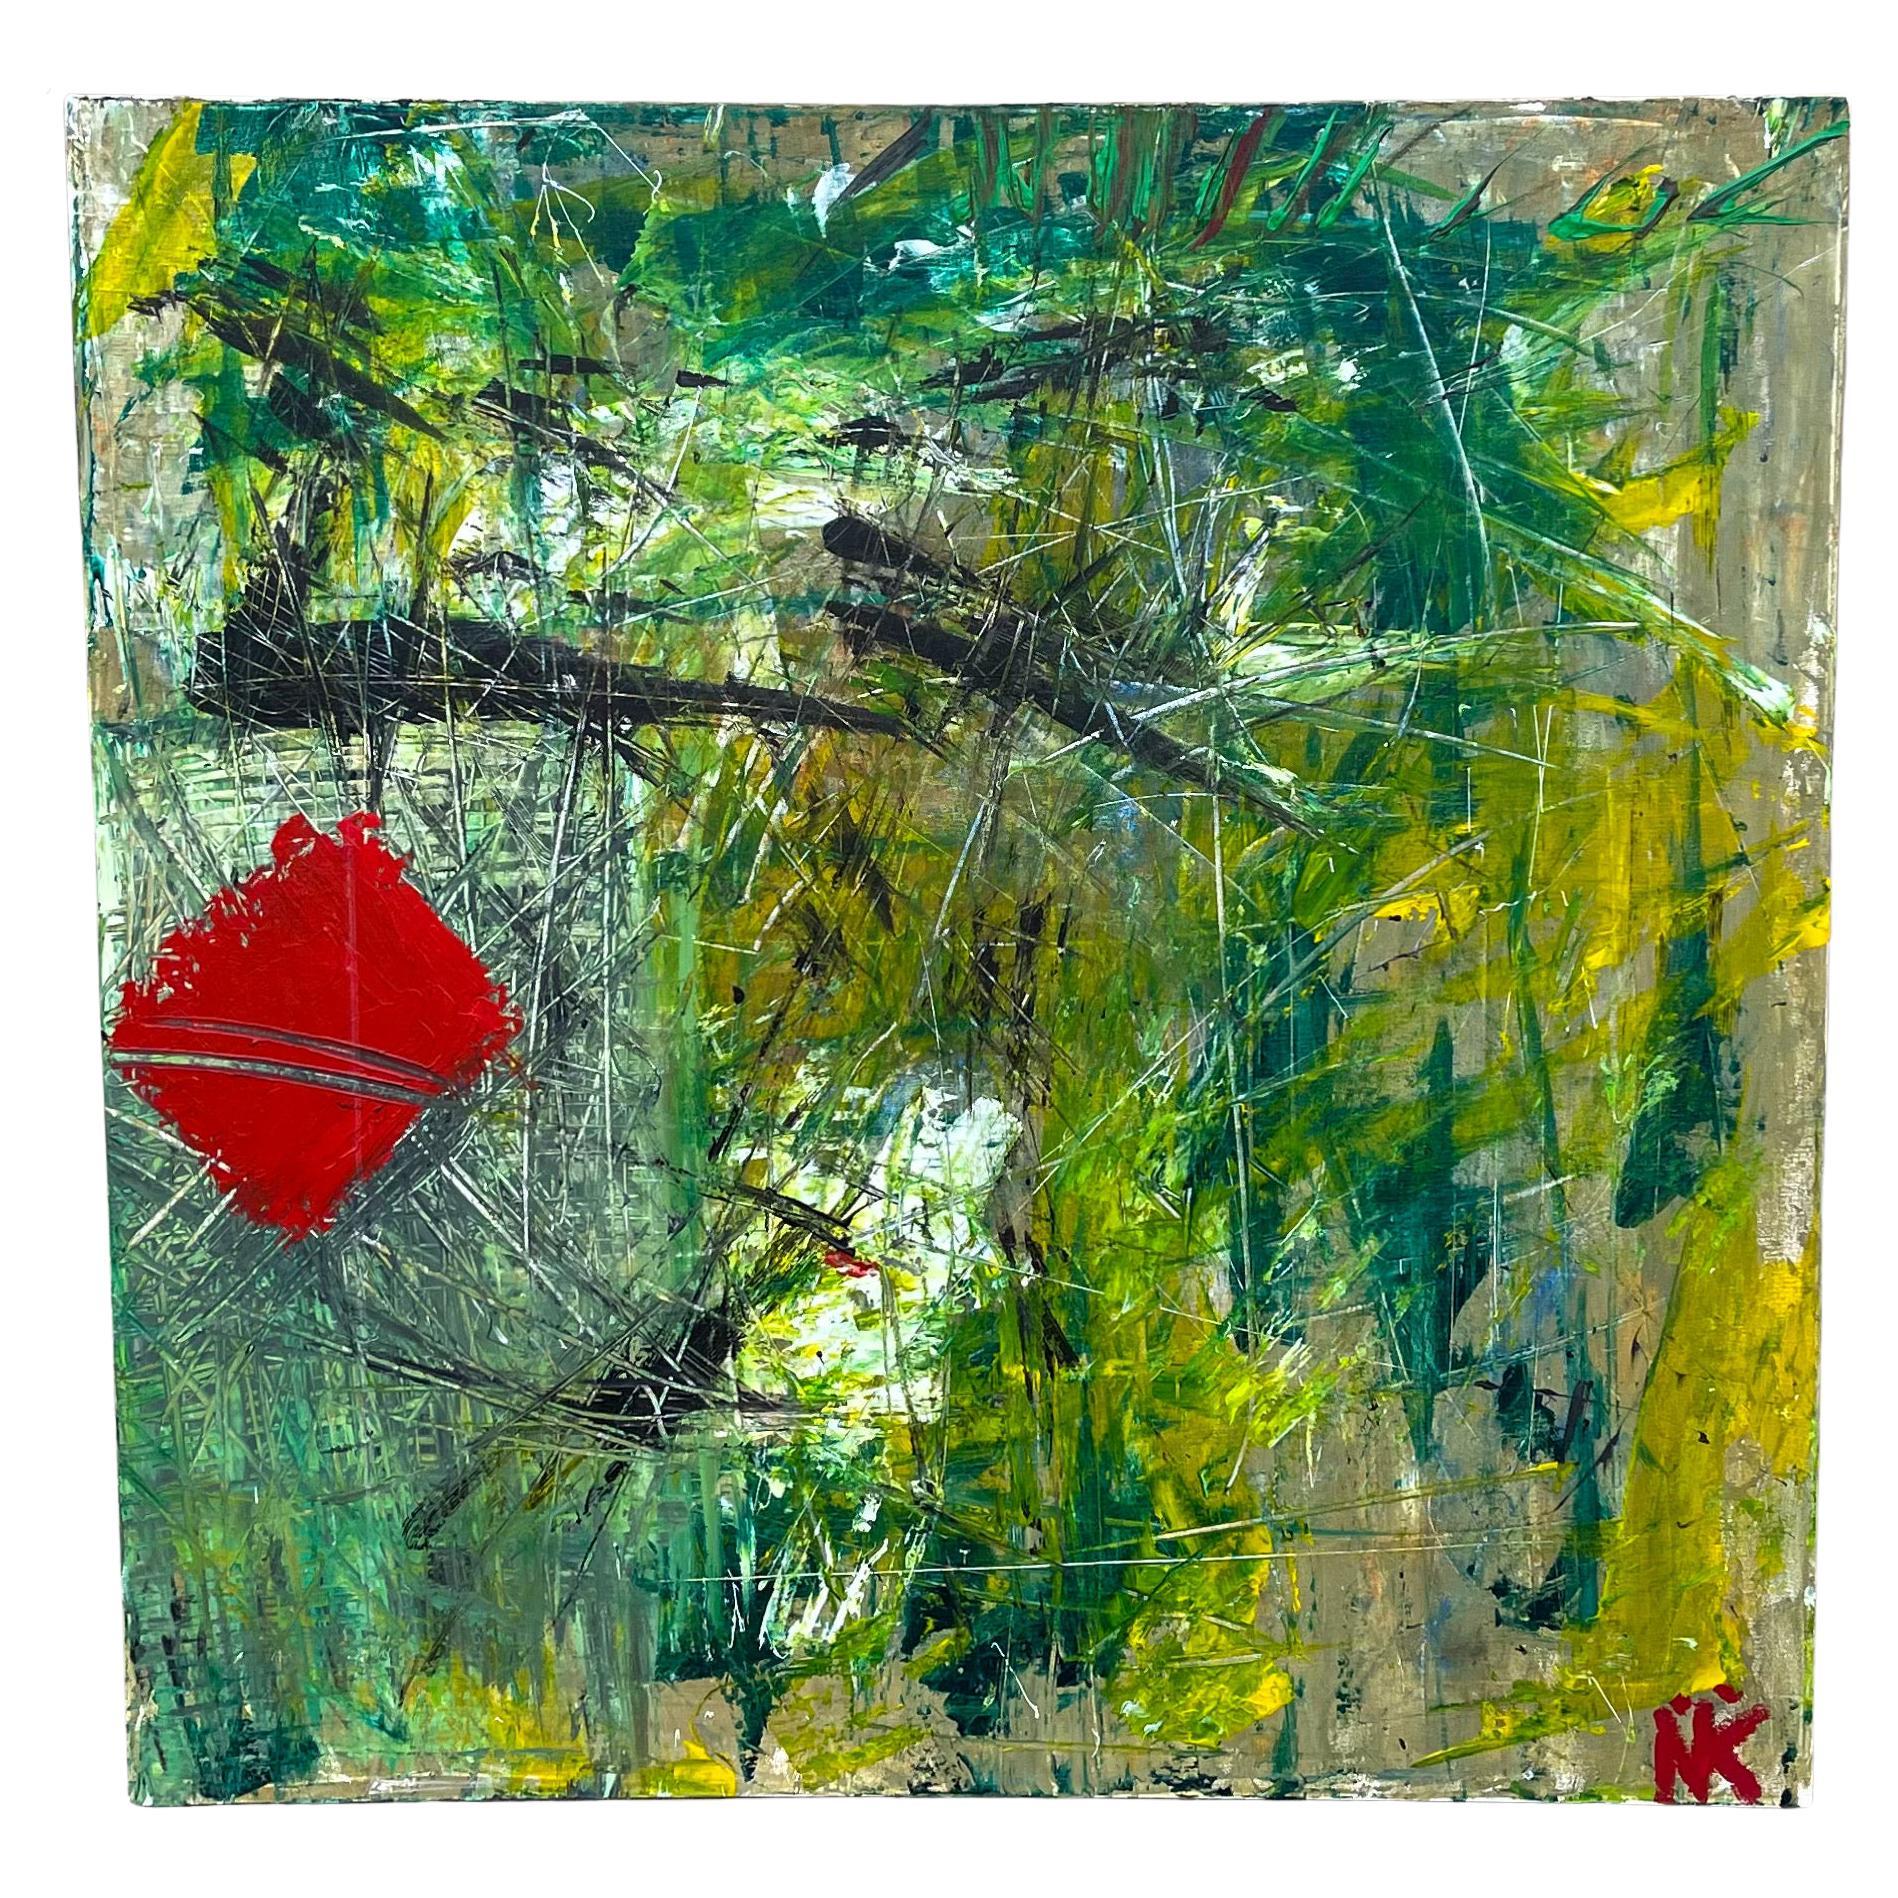 Modern art is wonderful for updating any decor! This is a large scale modern abstract signed oil painting completed by Scottish American born Nikki in 1972. It is textured with strong green, yellow and red colors.